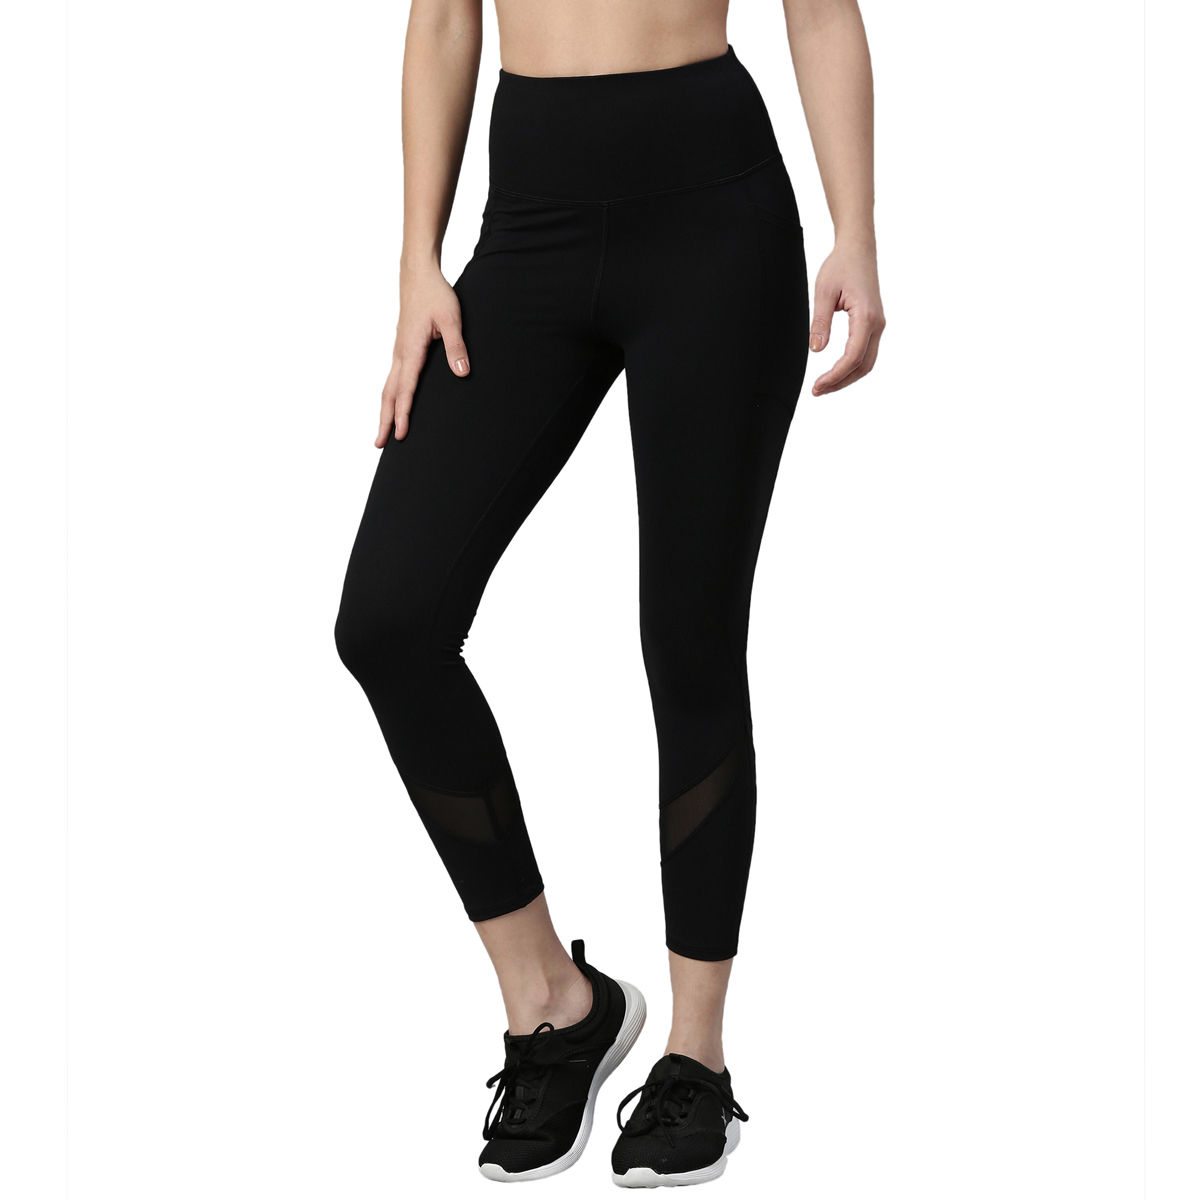 Enamor Dry Fit, High Waist Legging | Seamless Workout Legging With  Perforation For Ventilation For Women | A604 - Charcoal Melange / S